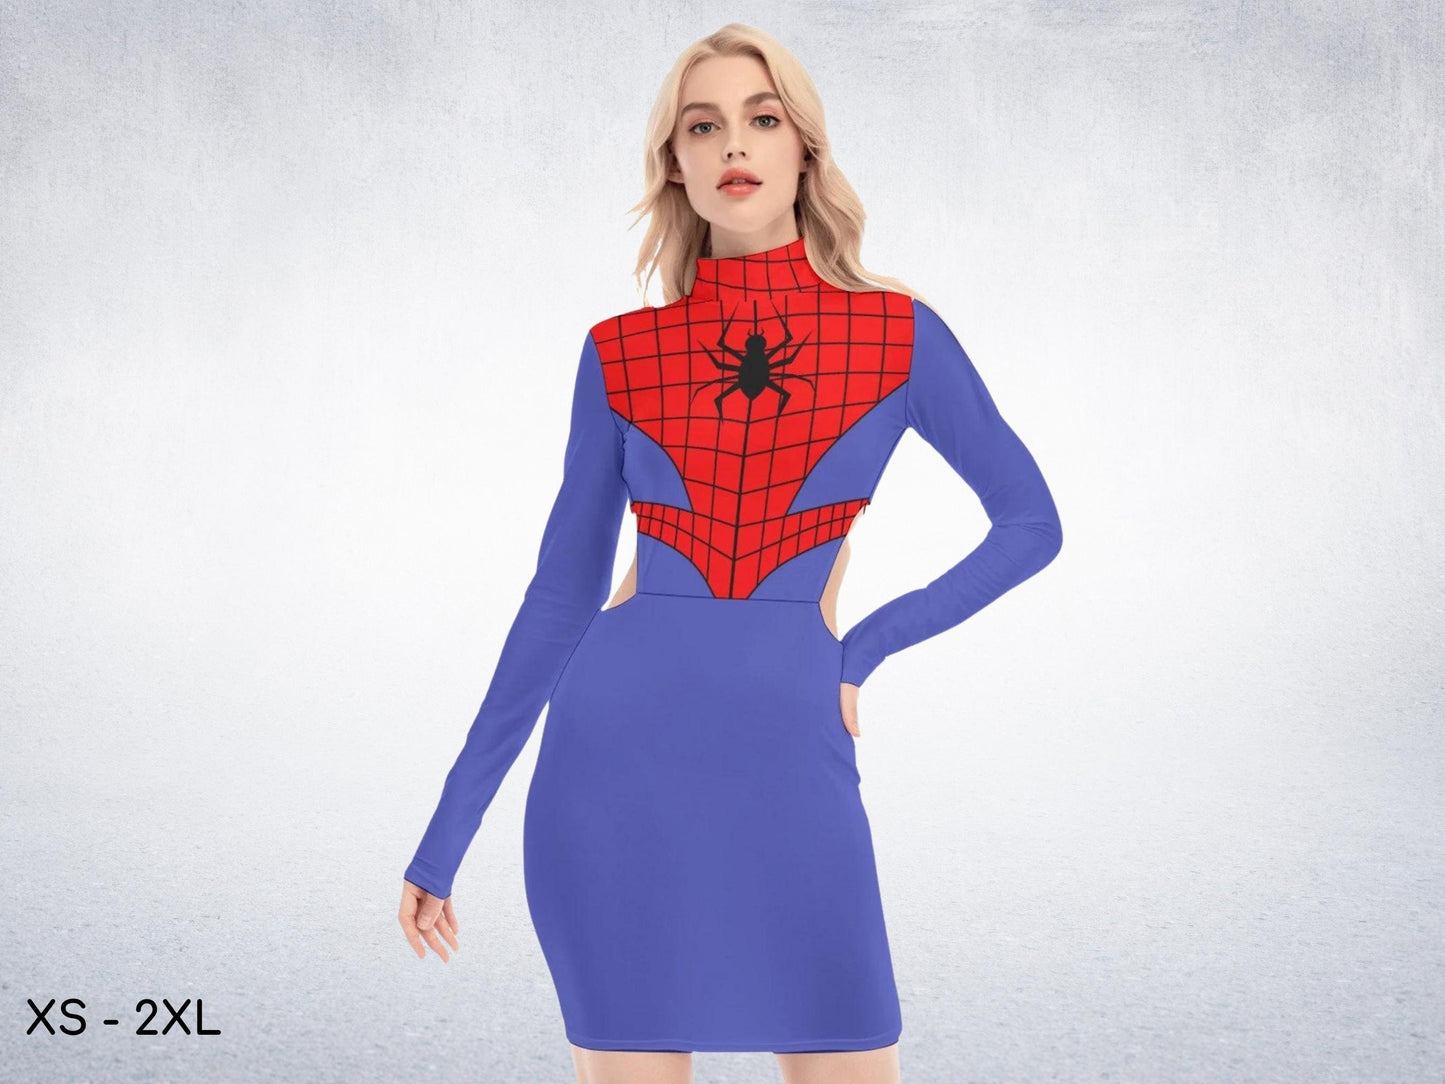 Spider Hero Inspired Sexy Dress, Halloween Costume, Gift for Her, Sexy Dress, Cosplay Costume, Adult Halloween Costume, Comics, Human Spider